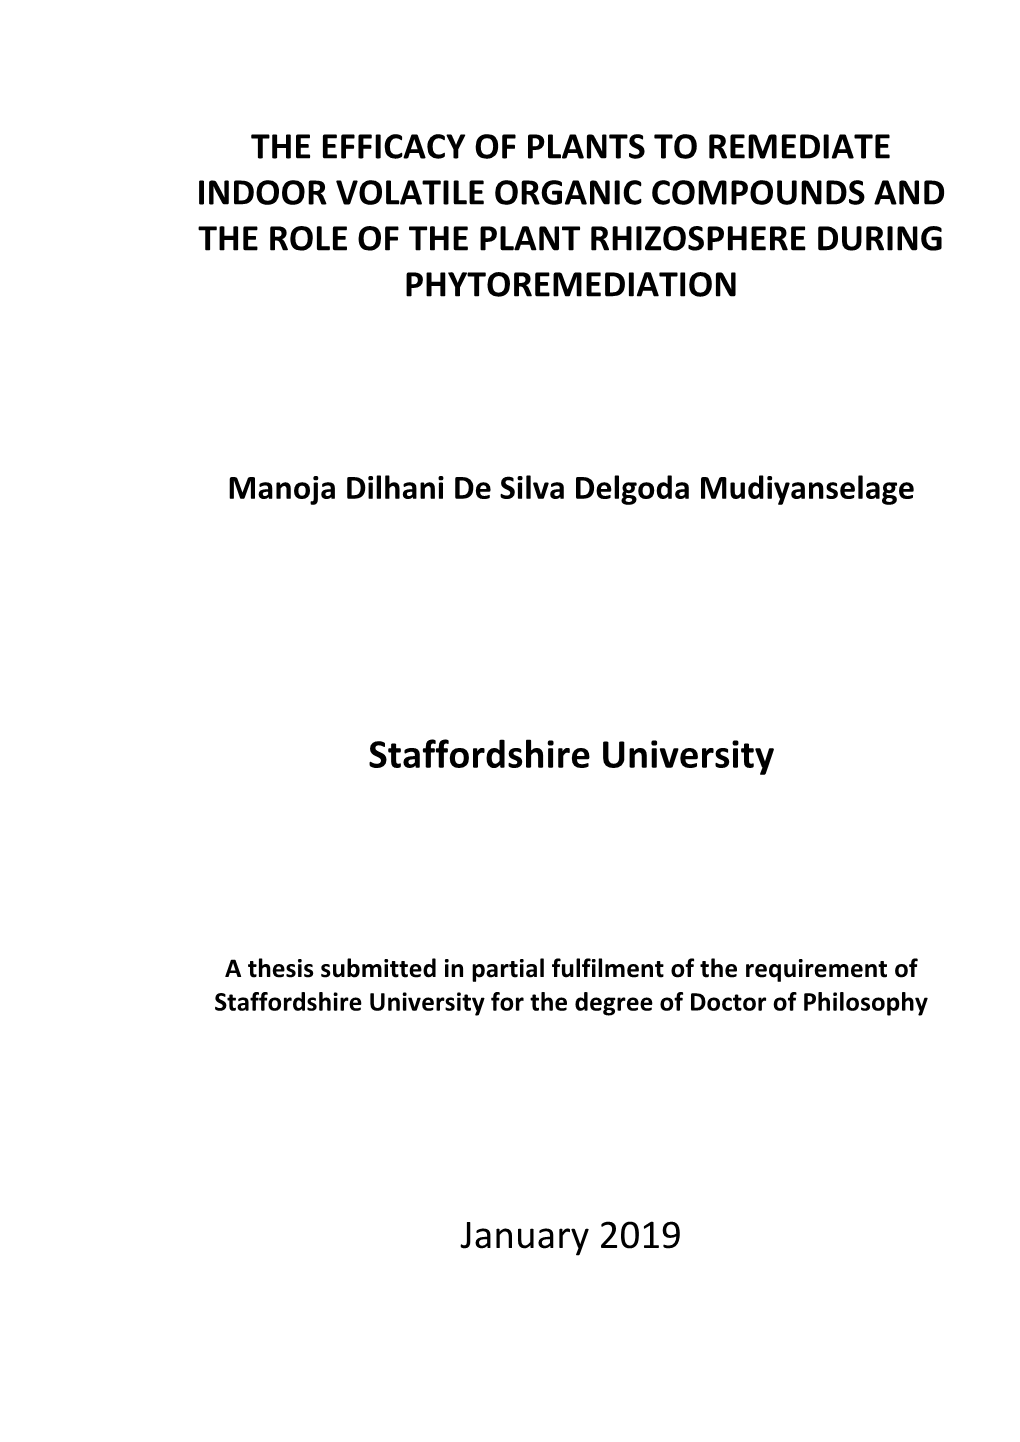 The Efficacy of Plants to Remediate Indoor Volatile Organic Compounds and the Role of the Plant Rhizosphere During Phytoremediation